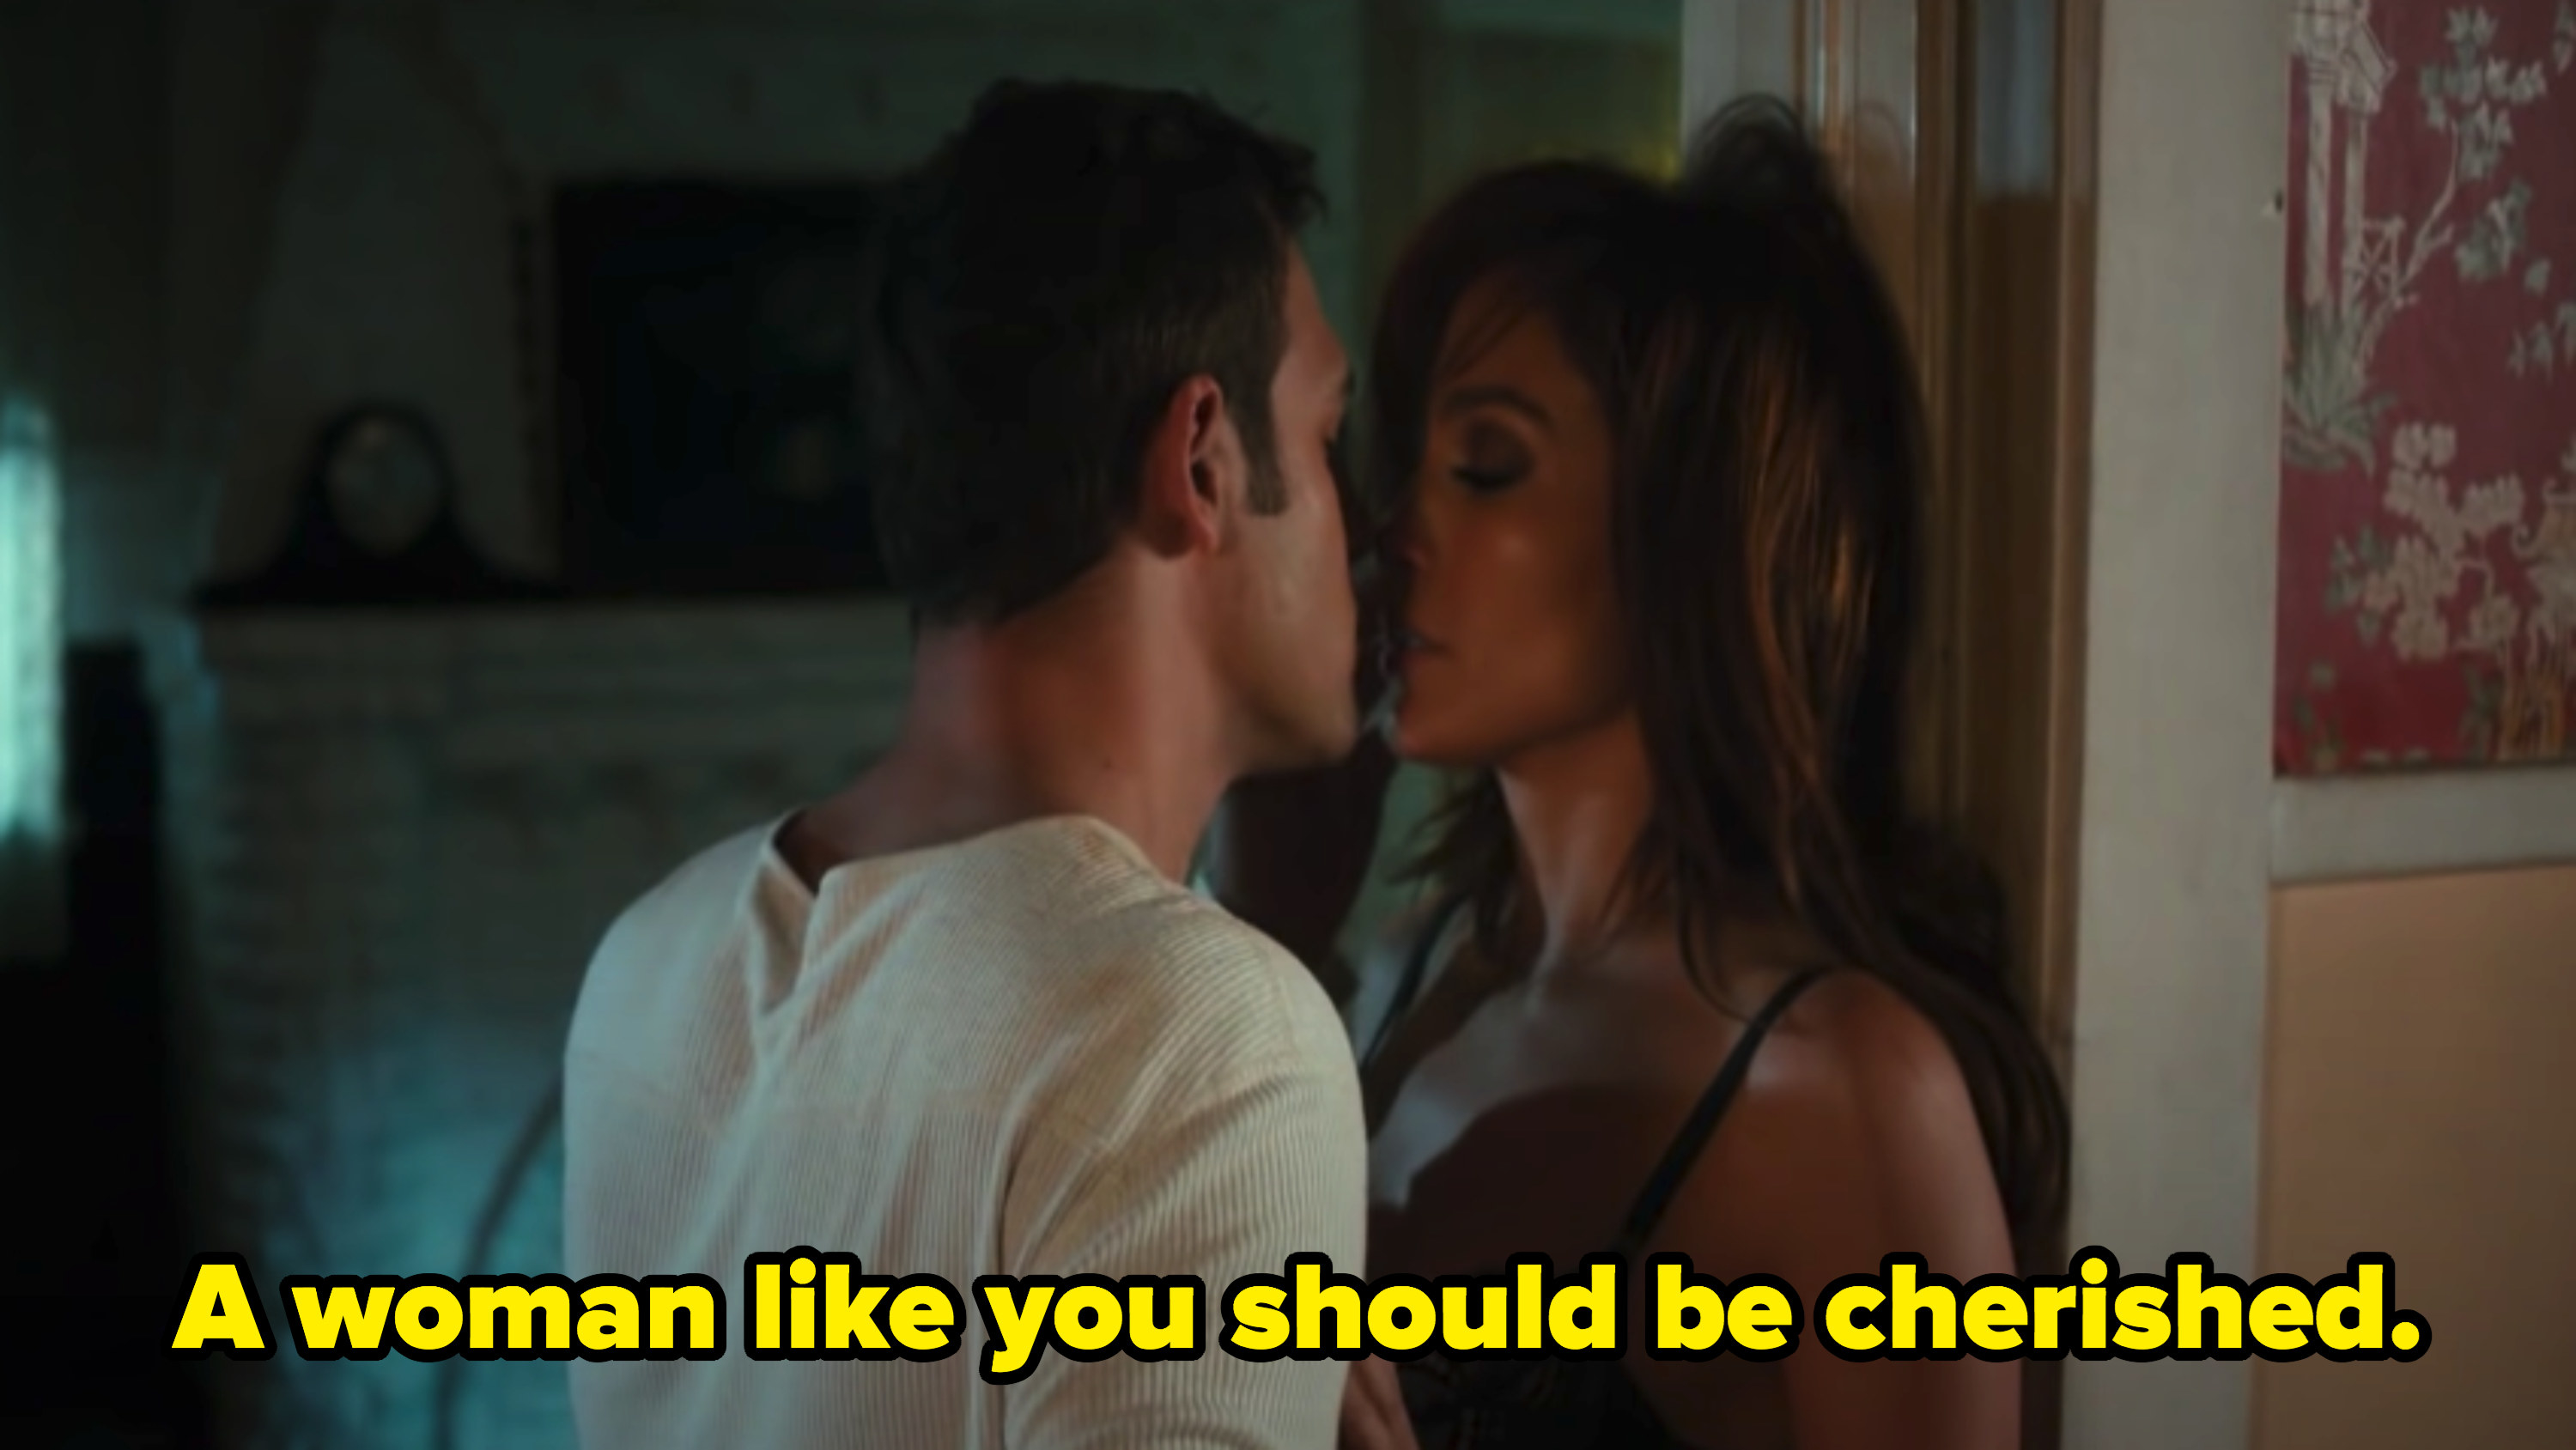 Noah seducing Claire for the first time in &quot;The Boy Next Door&quot;